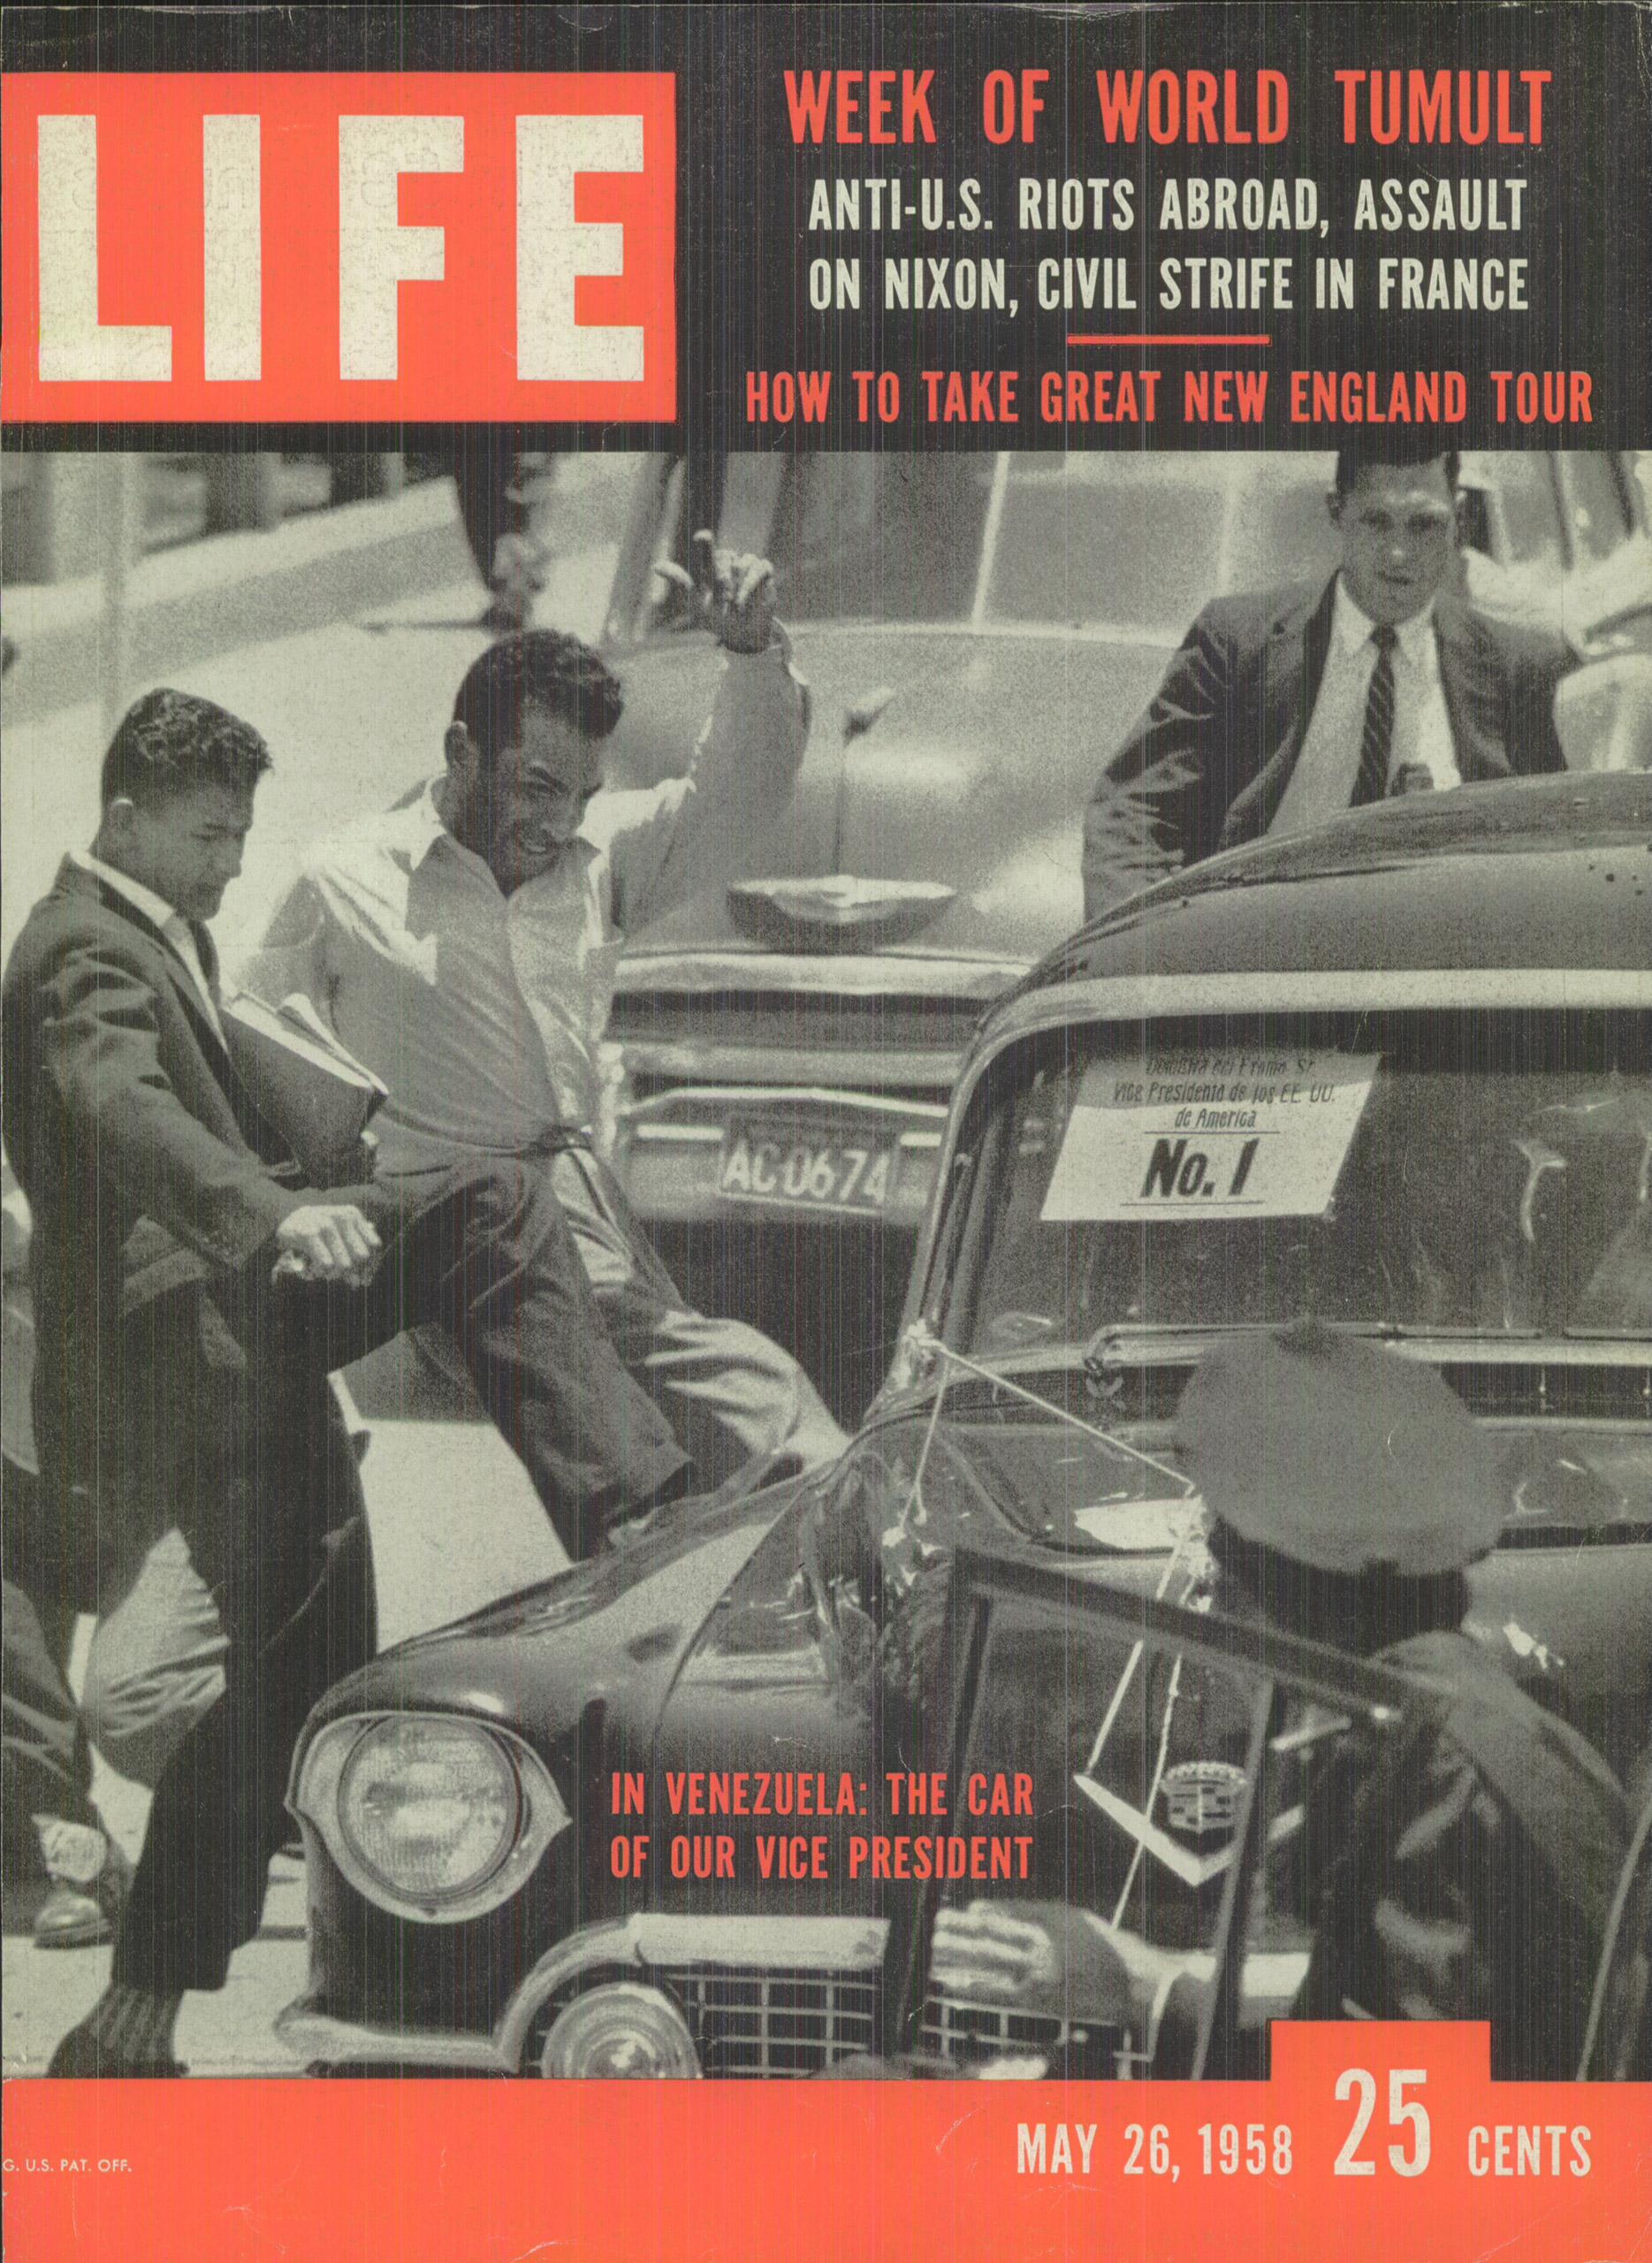 May 26, 1958 cover of LIFE magazine.